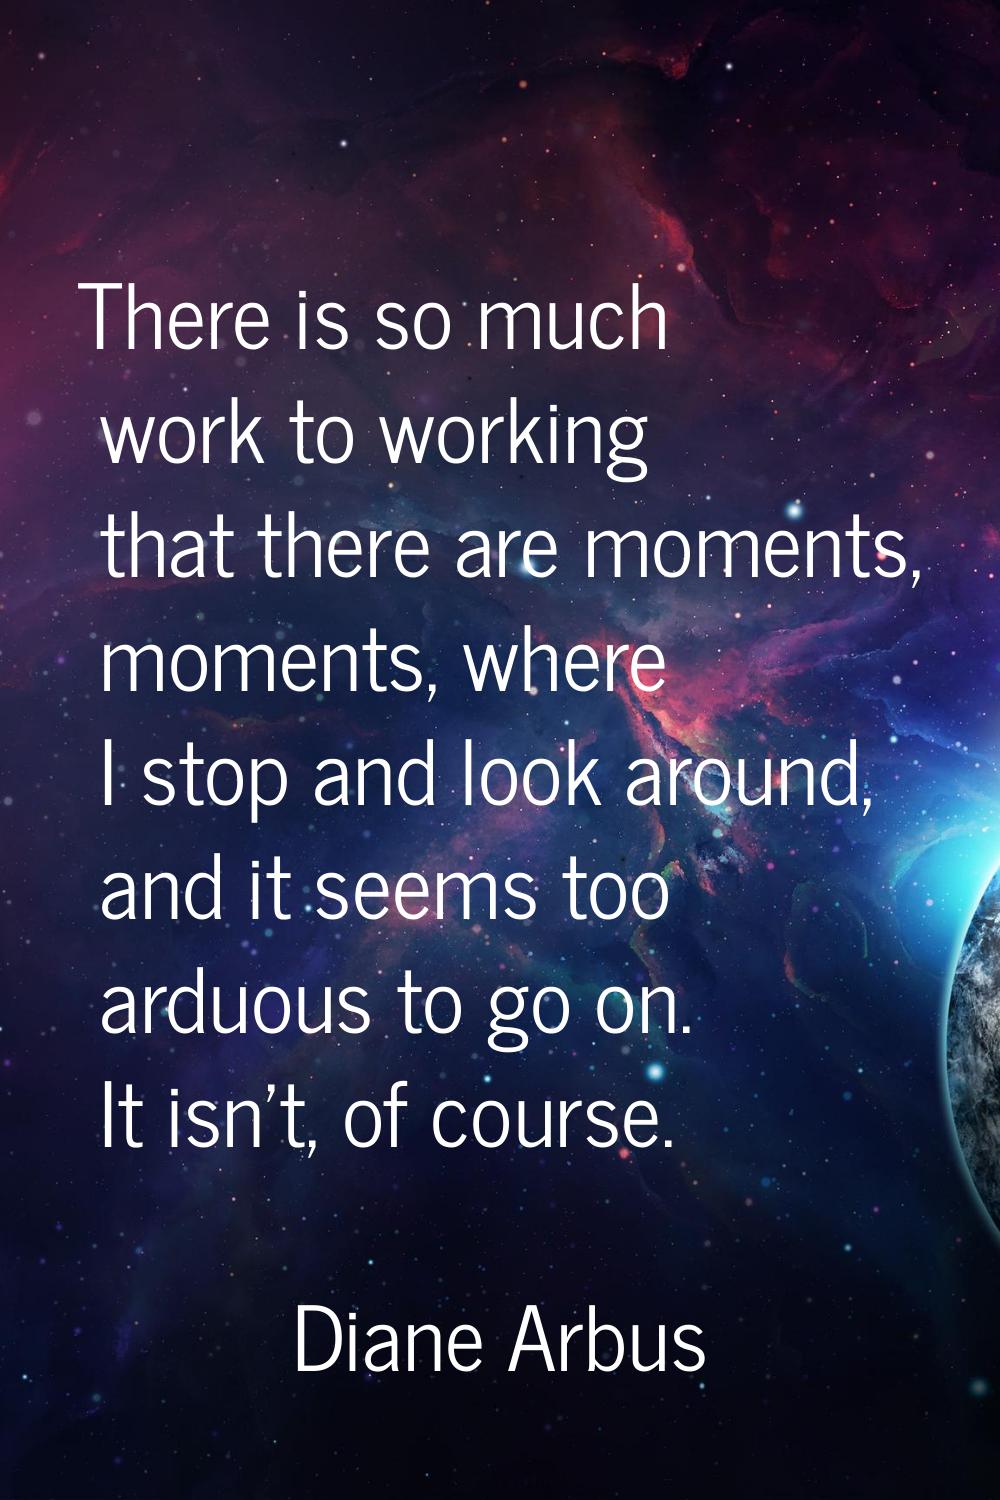 There is so much work to working that there are moments, moments, where I stop and look around, and